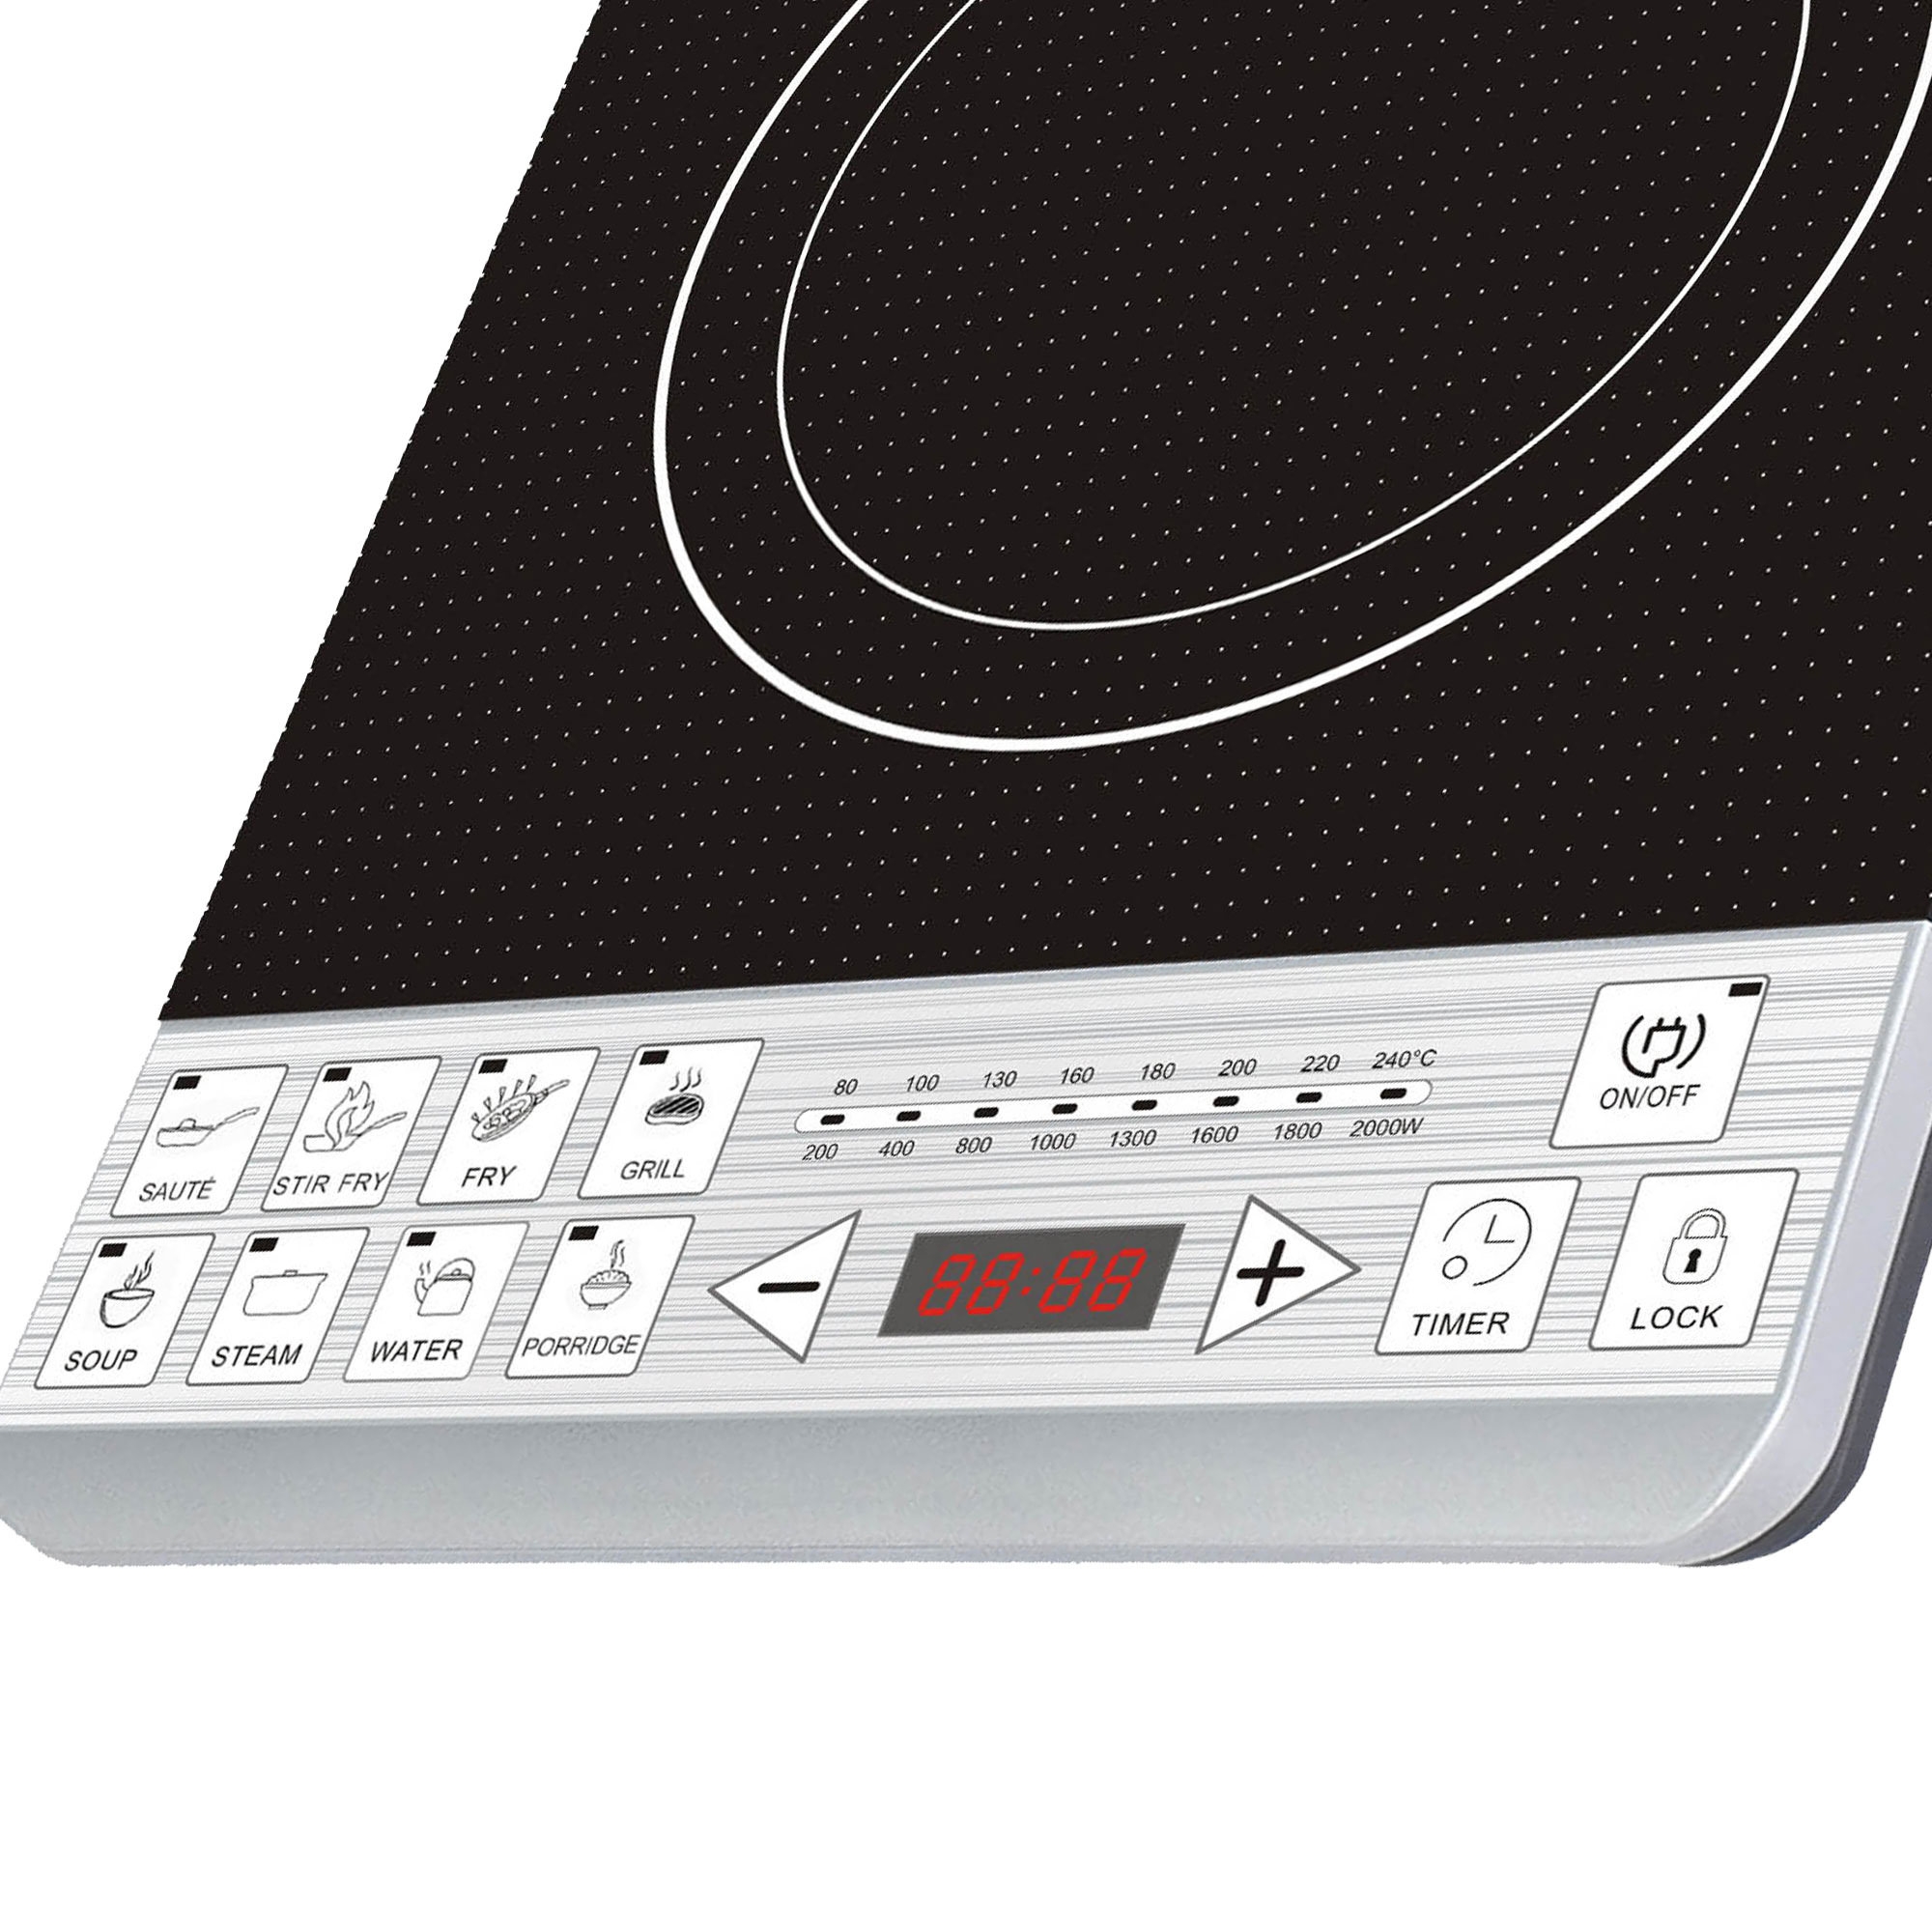 Healthy Choice Electric Induction Cooker Image 2